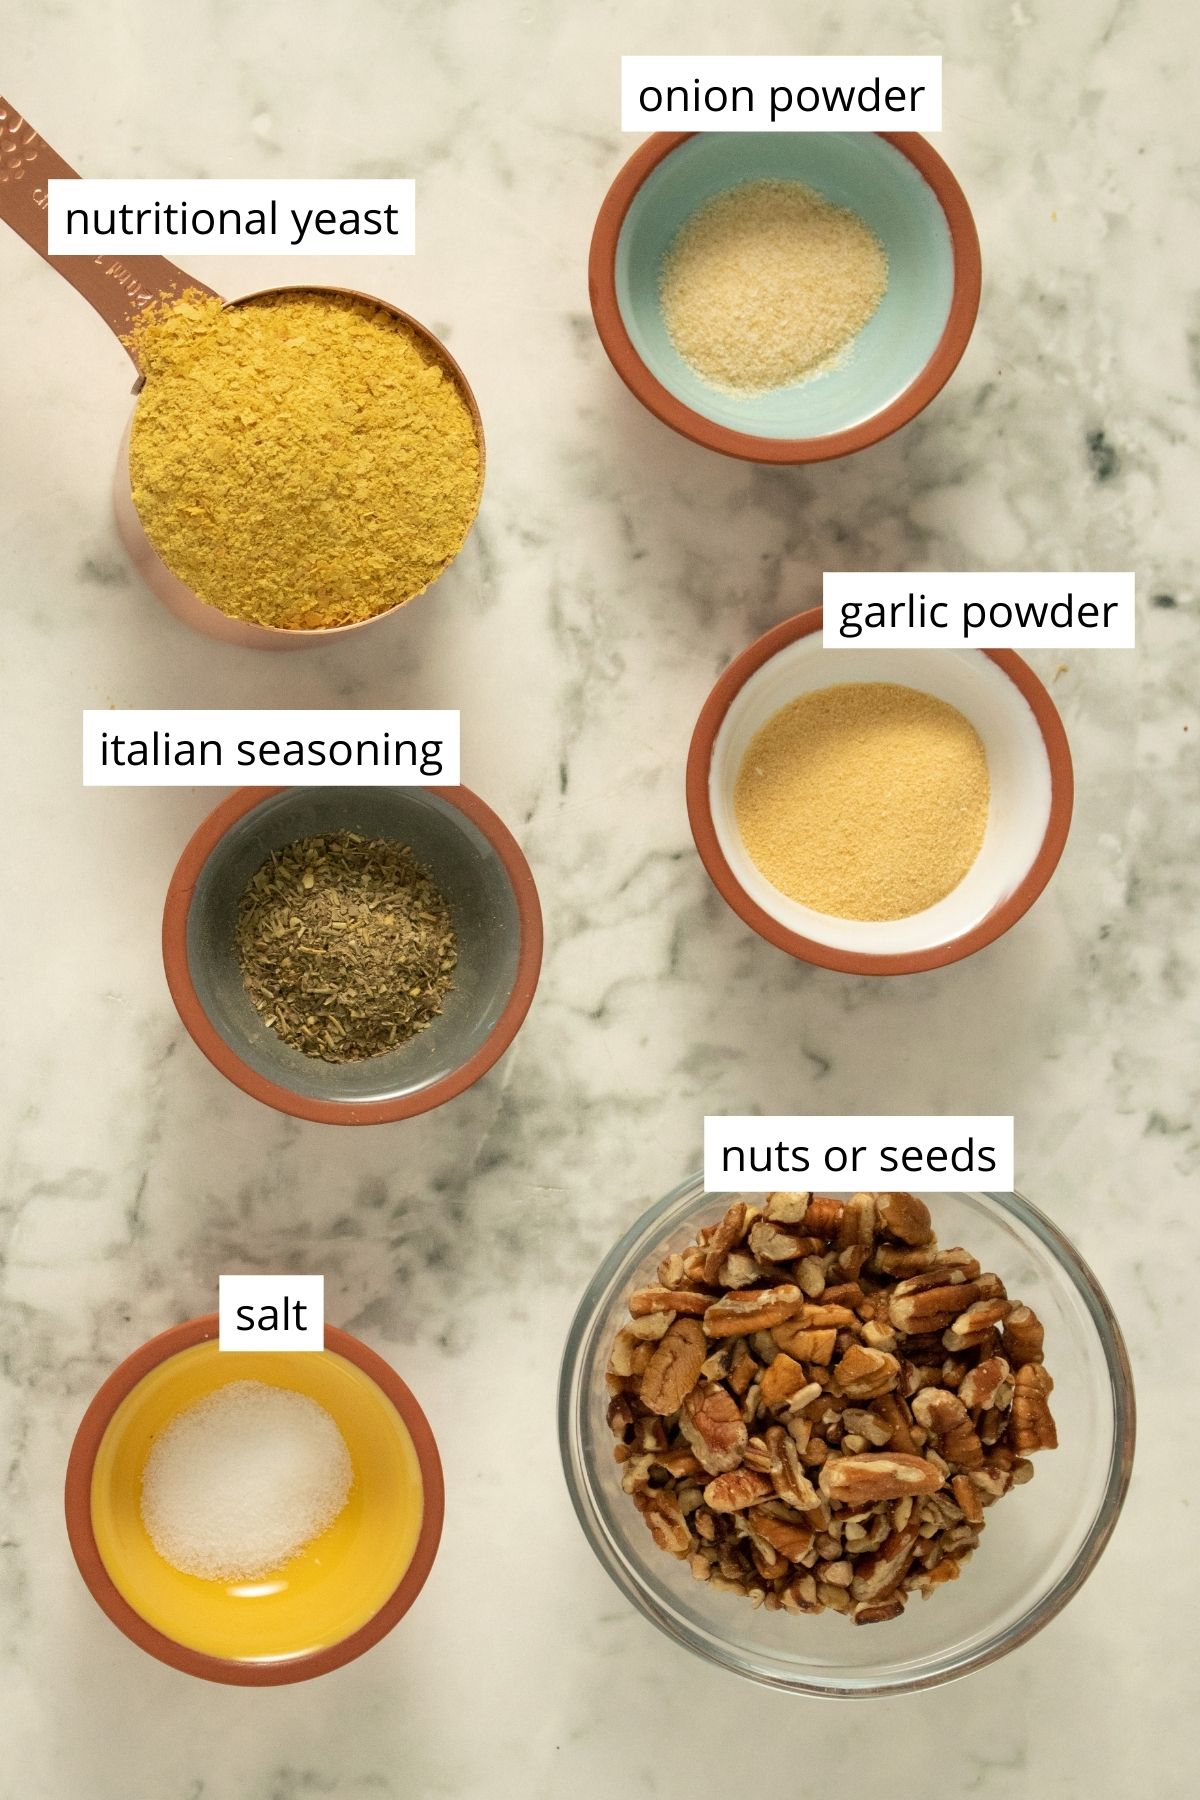 nutritional yeast, nuts, and spices in bowls on a marble table